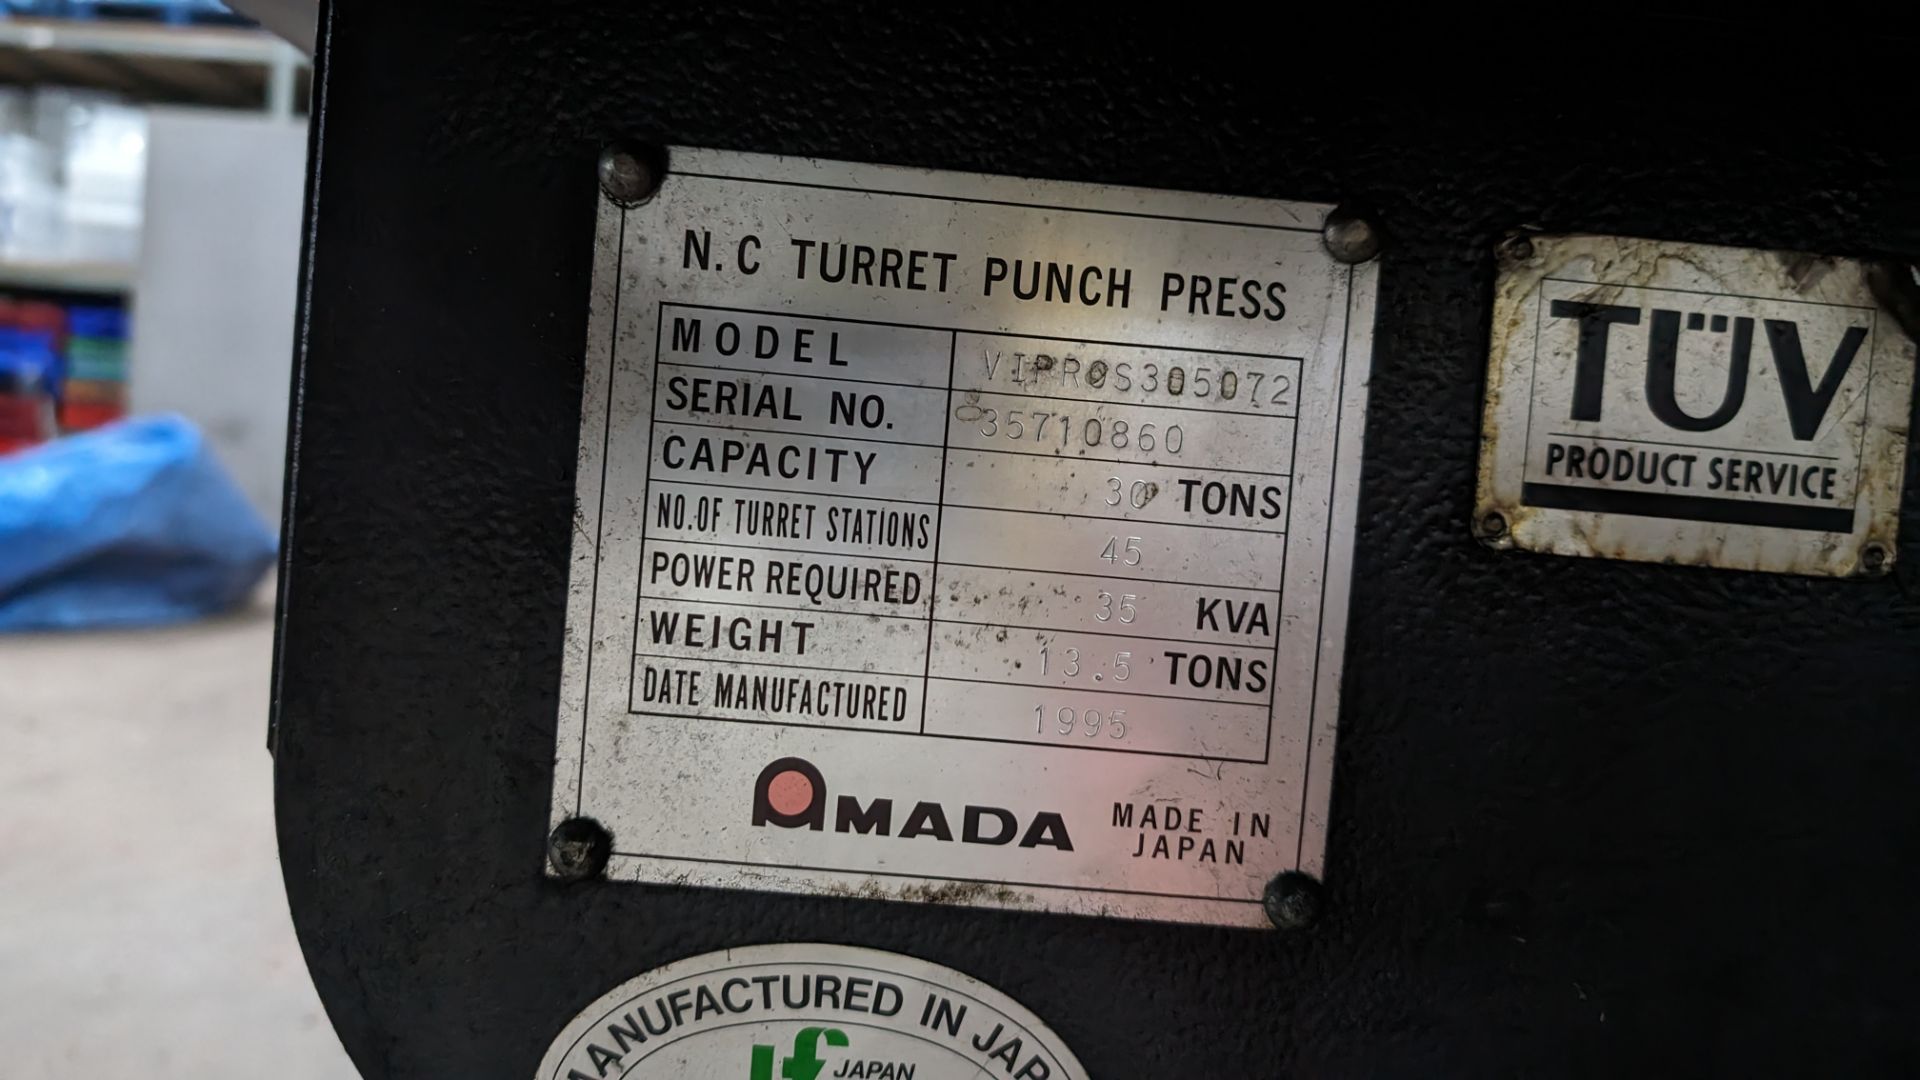 1995 Amada Vipros 357 NC turret punch press, 45 turret stations, 30 ton capacity, serial number 3571 - Image 25 of 51